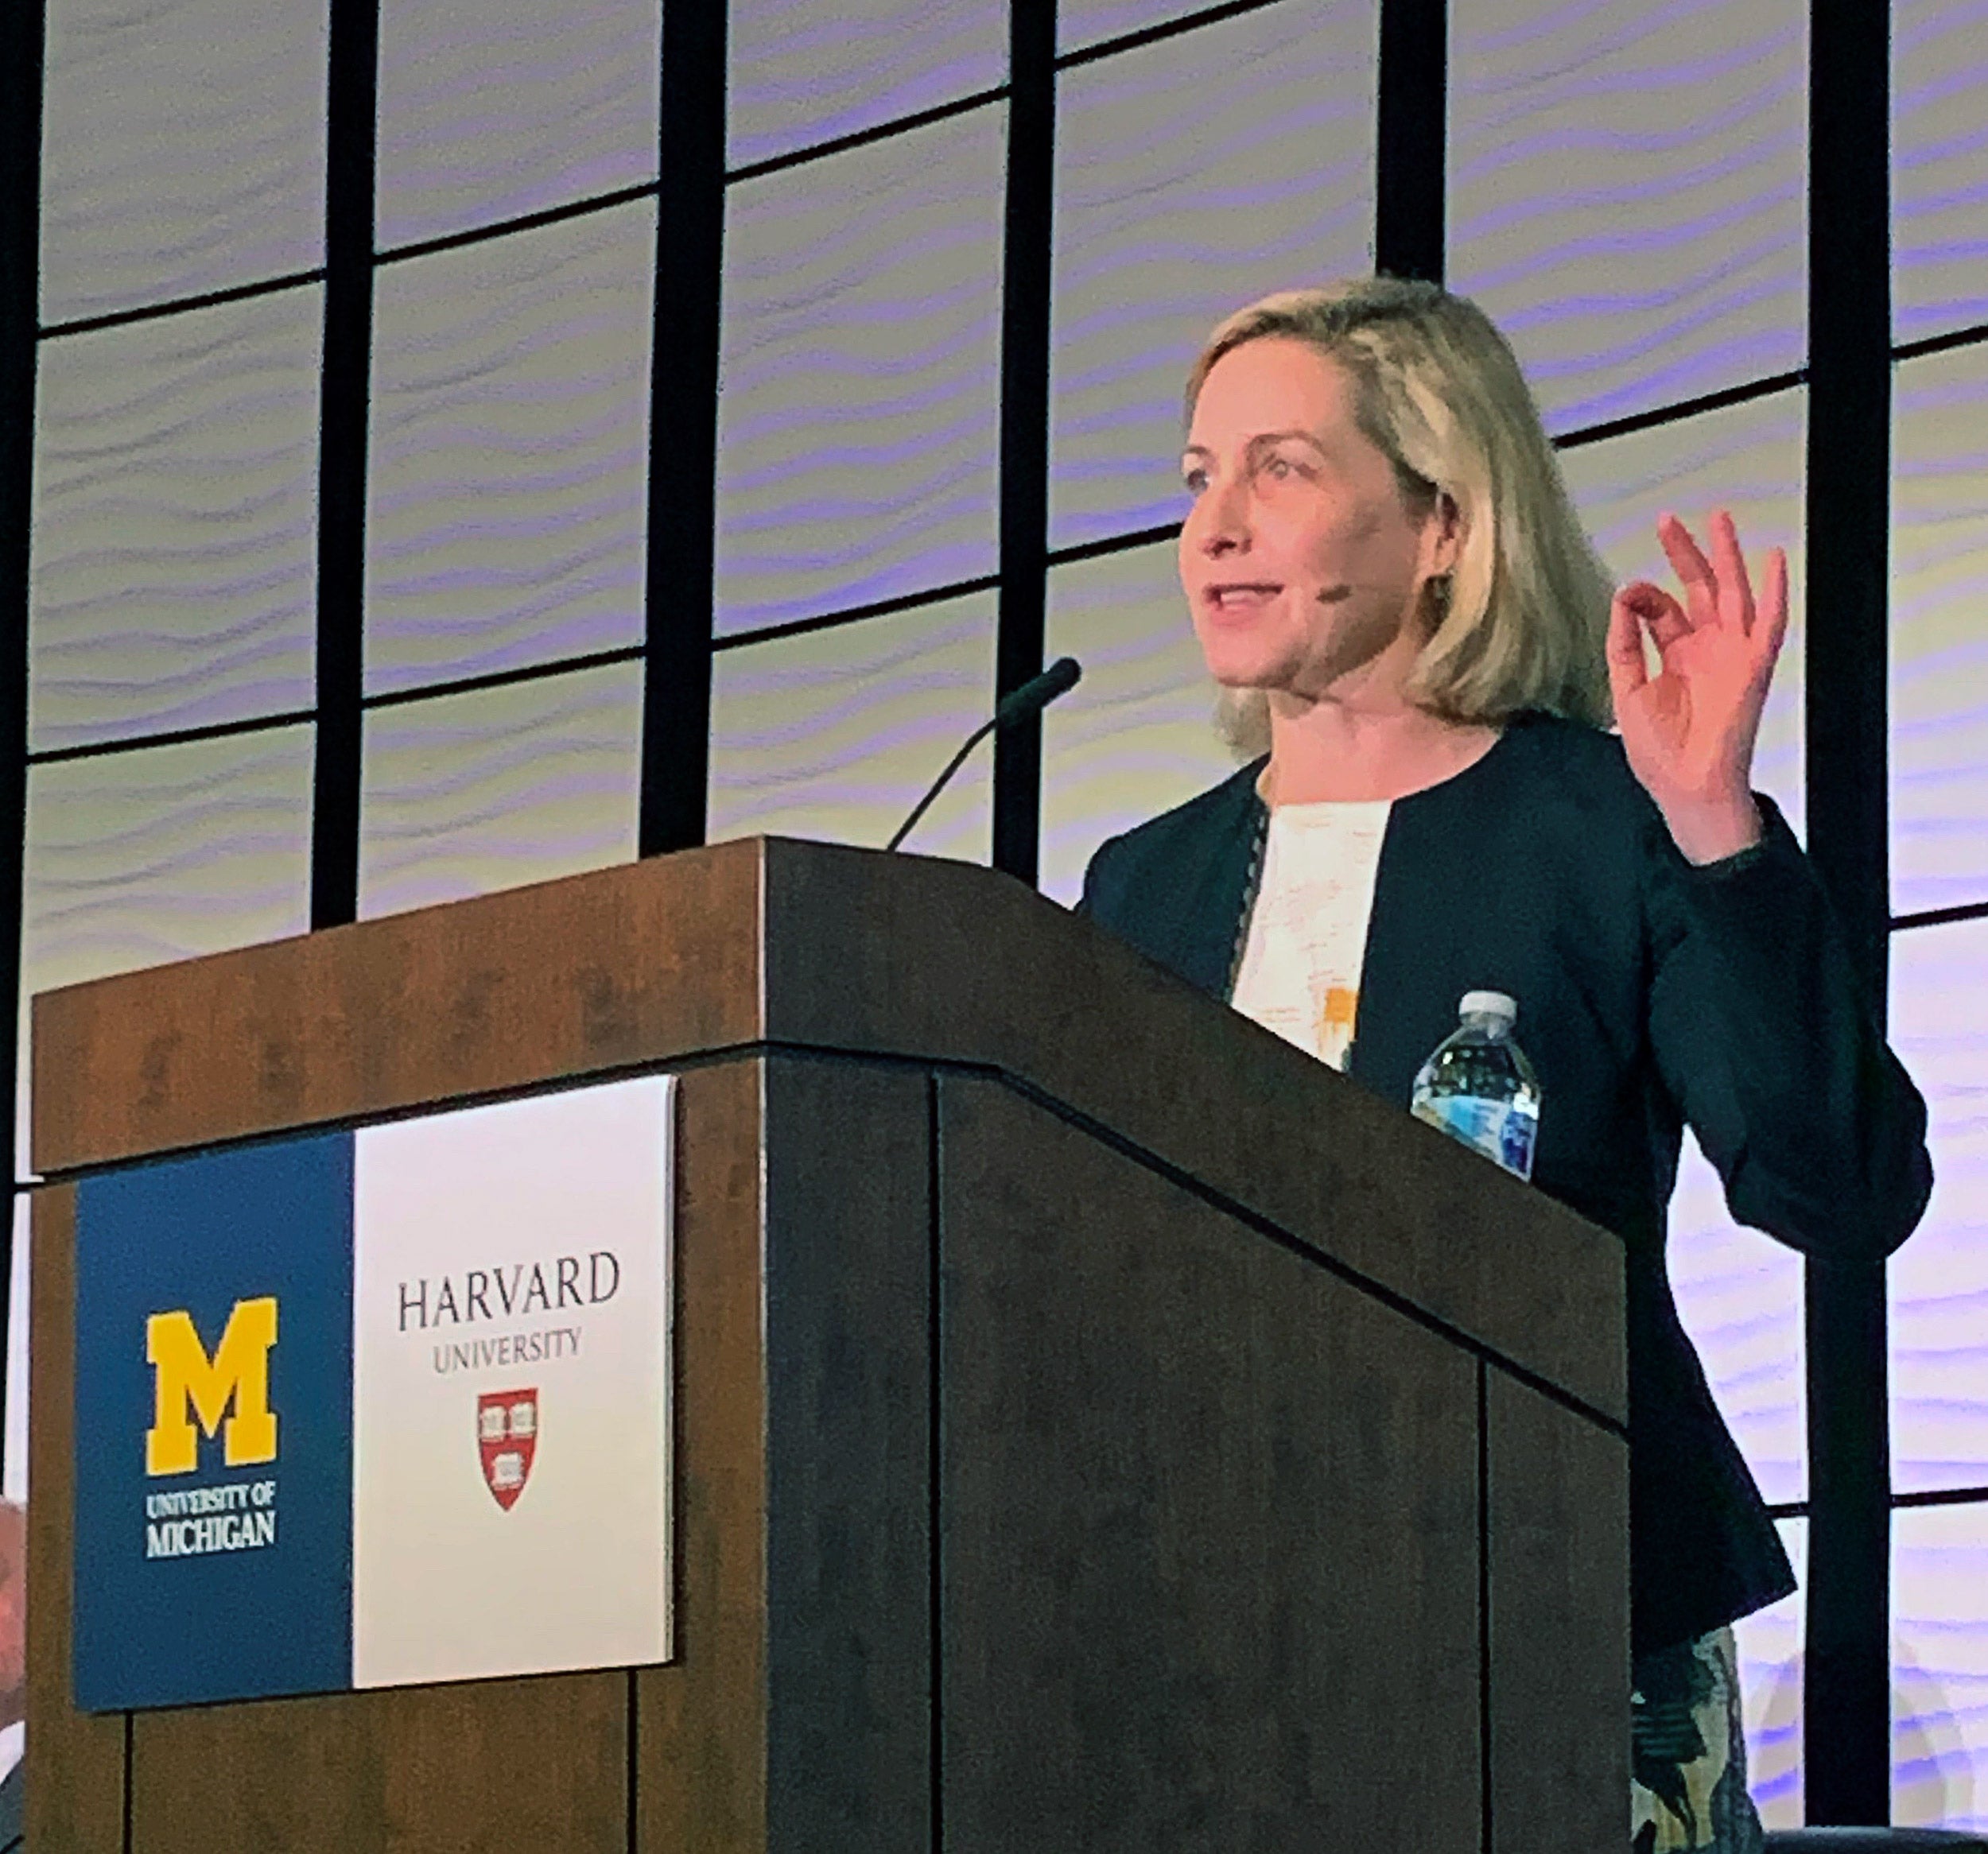 Meredith Rosenthal from the Chan School speaking at the University of Michigan